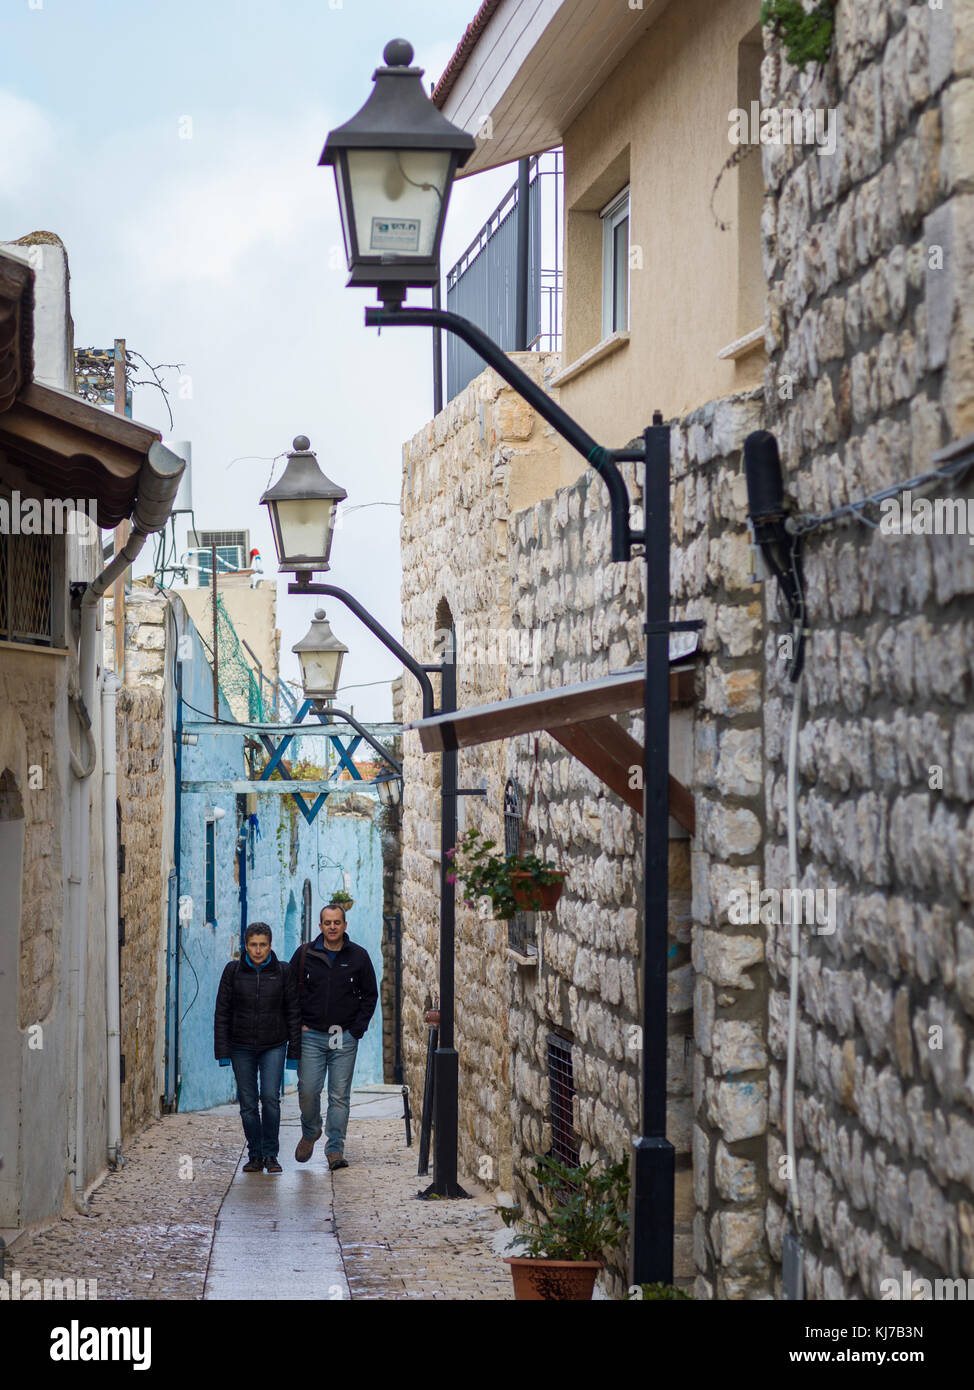 Two men walking in street, Safed, Northern District, Israel Stock Photo